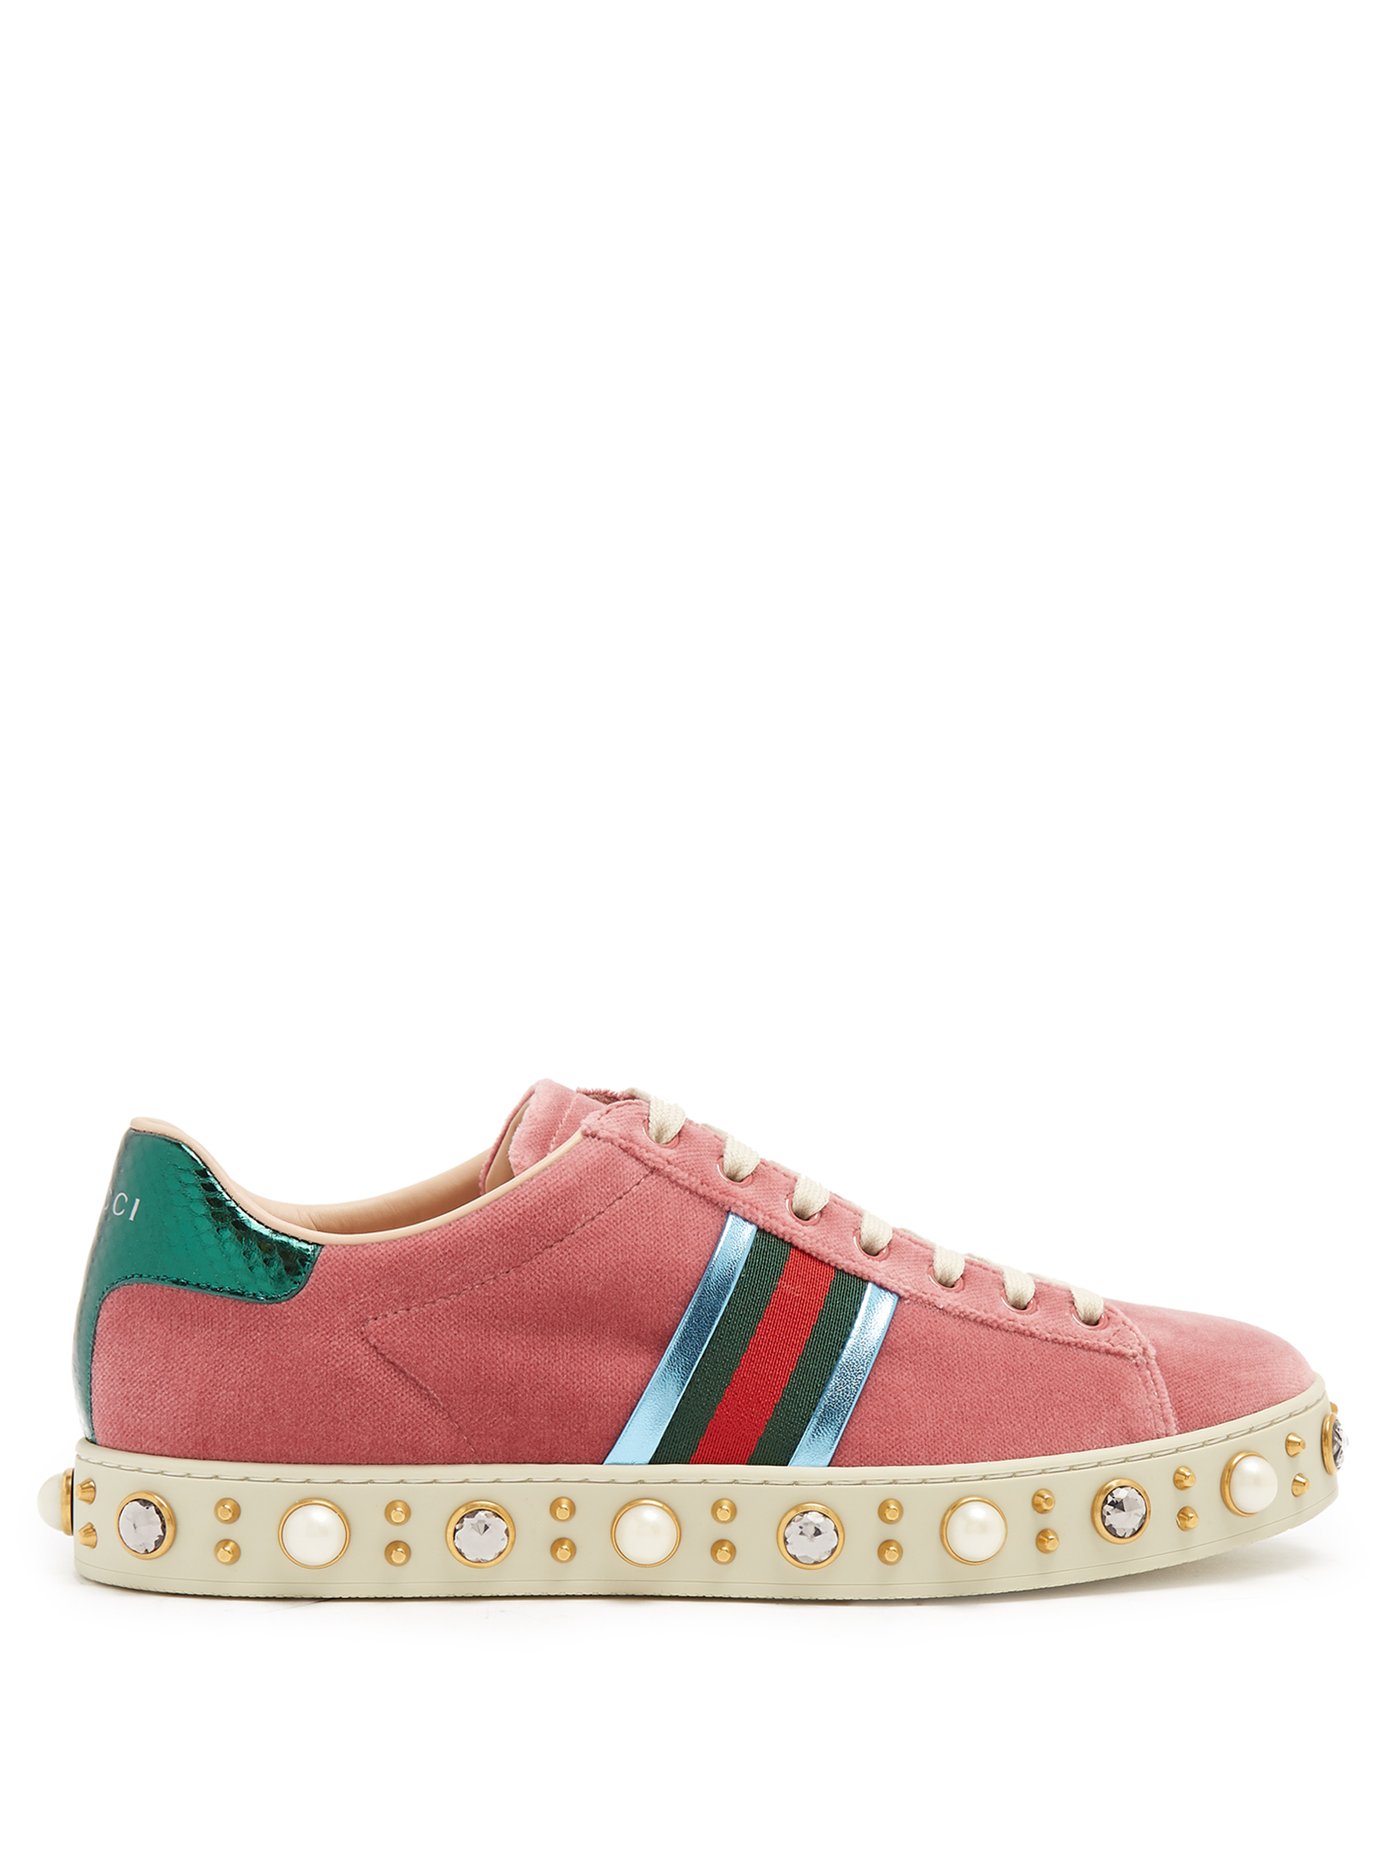 gucci ace sneakers pearl